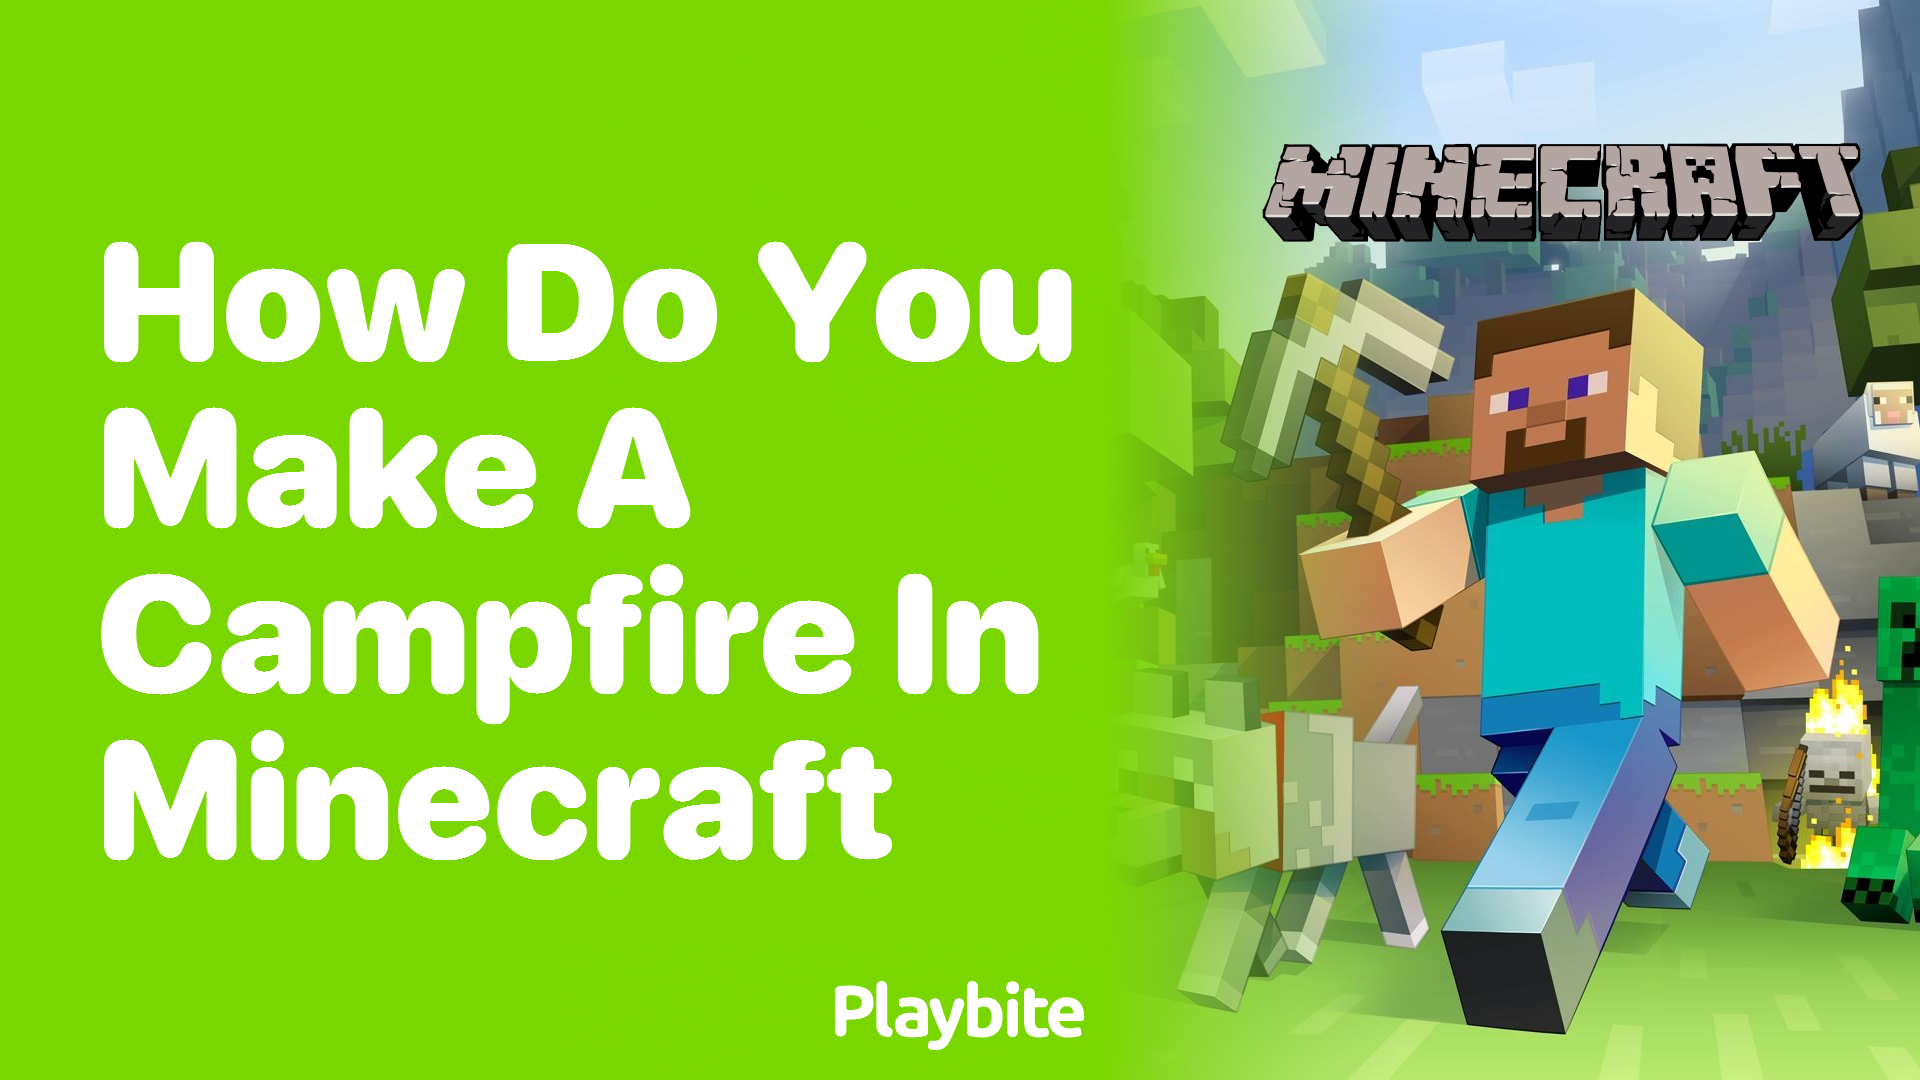 How Do You Make a Campfire in Minecraft?